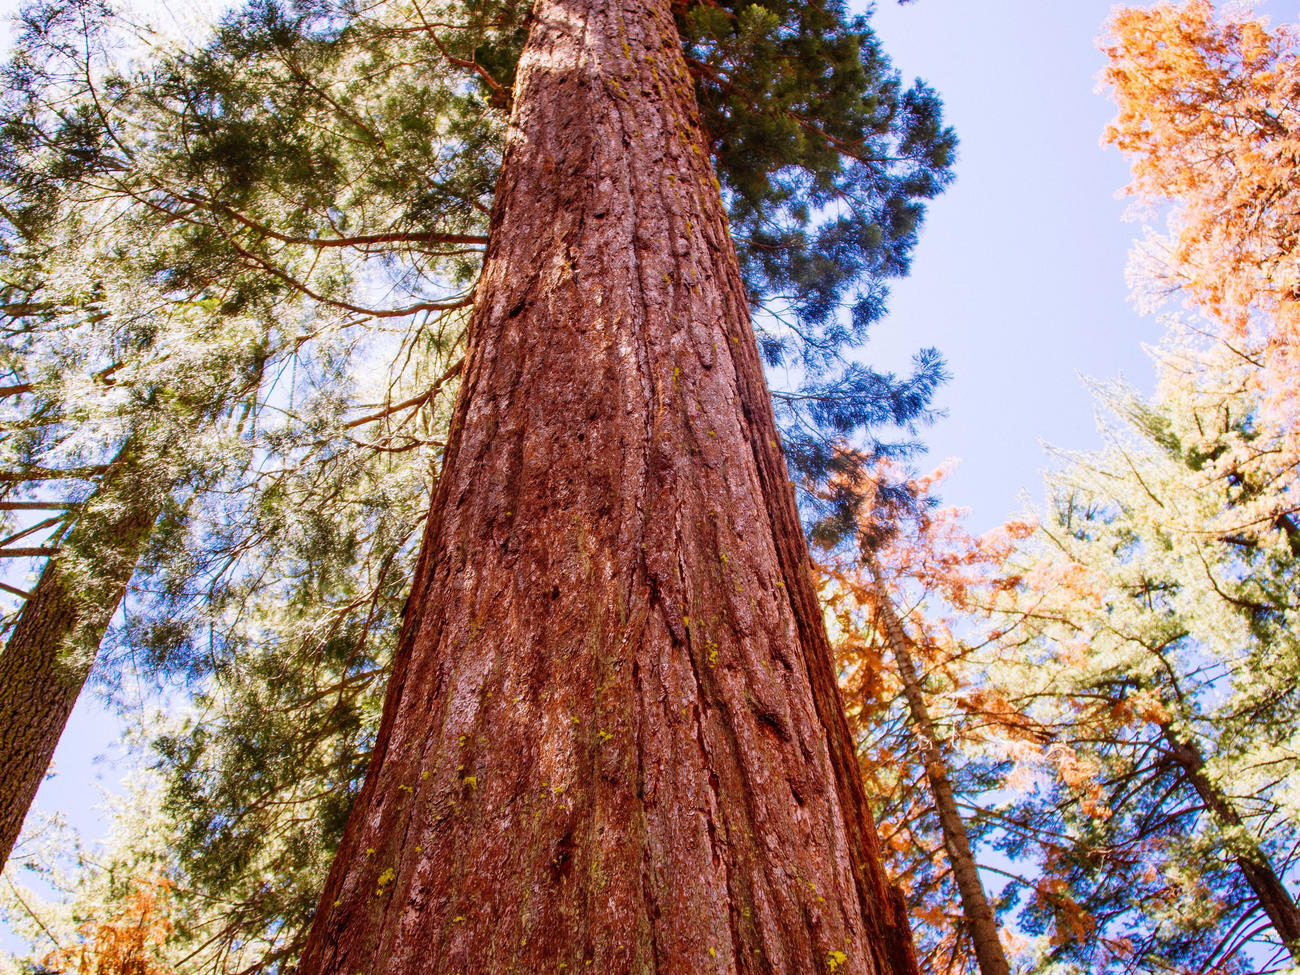 Yosemite’s Giant Sequoias Are Back in Business